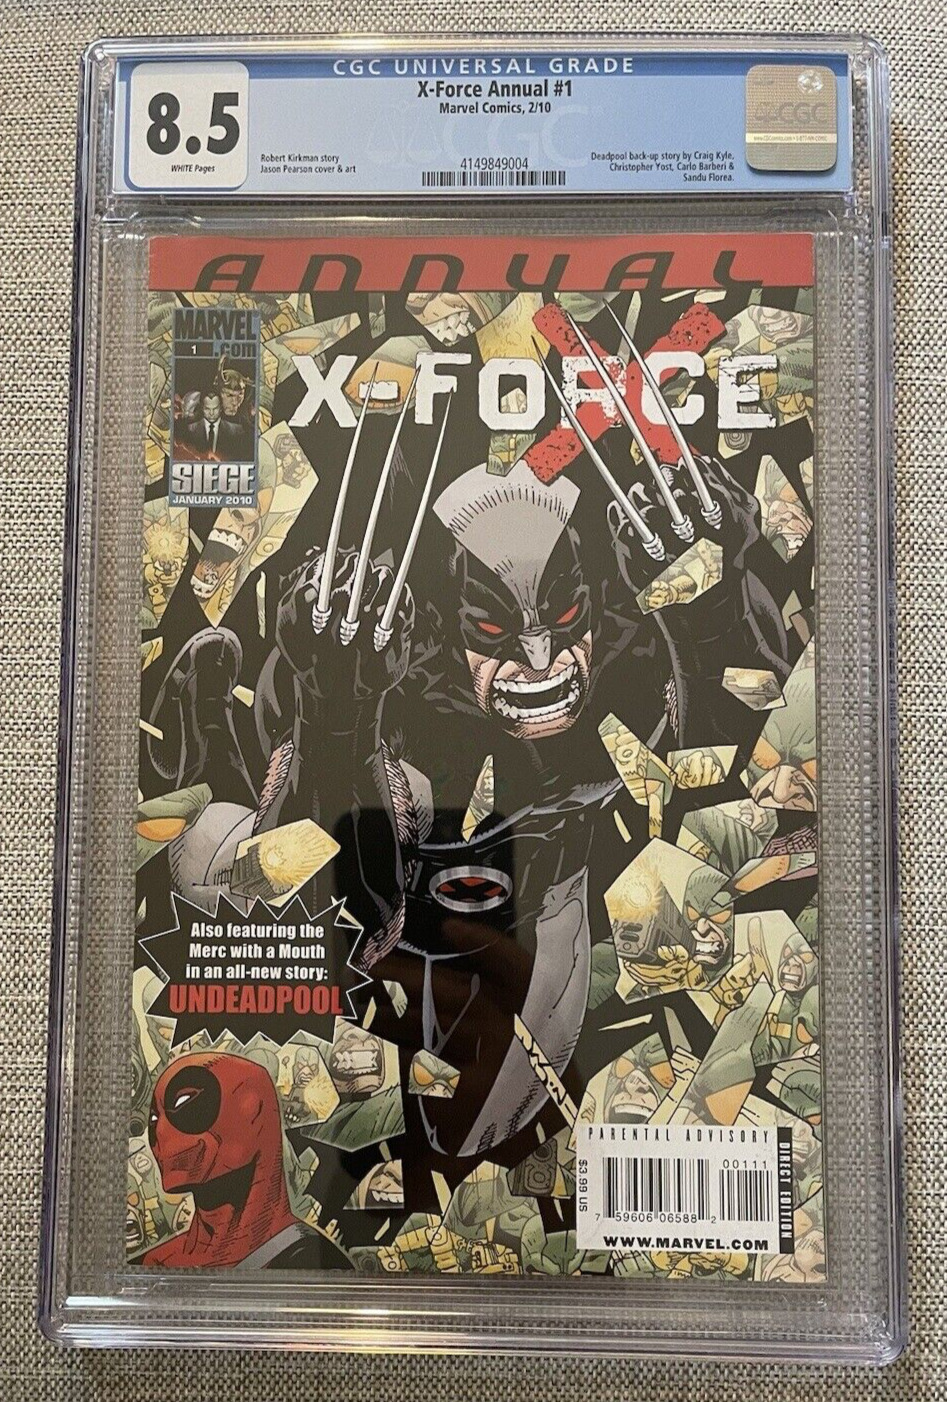 X-Force Annual #1 CGC 8.5 (2010) Deadpool Backup Story Wolverine Deadpool Cover